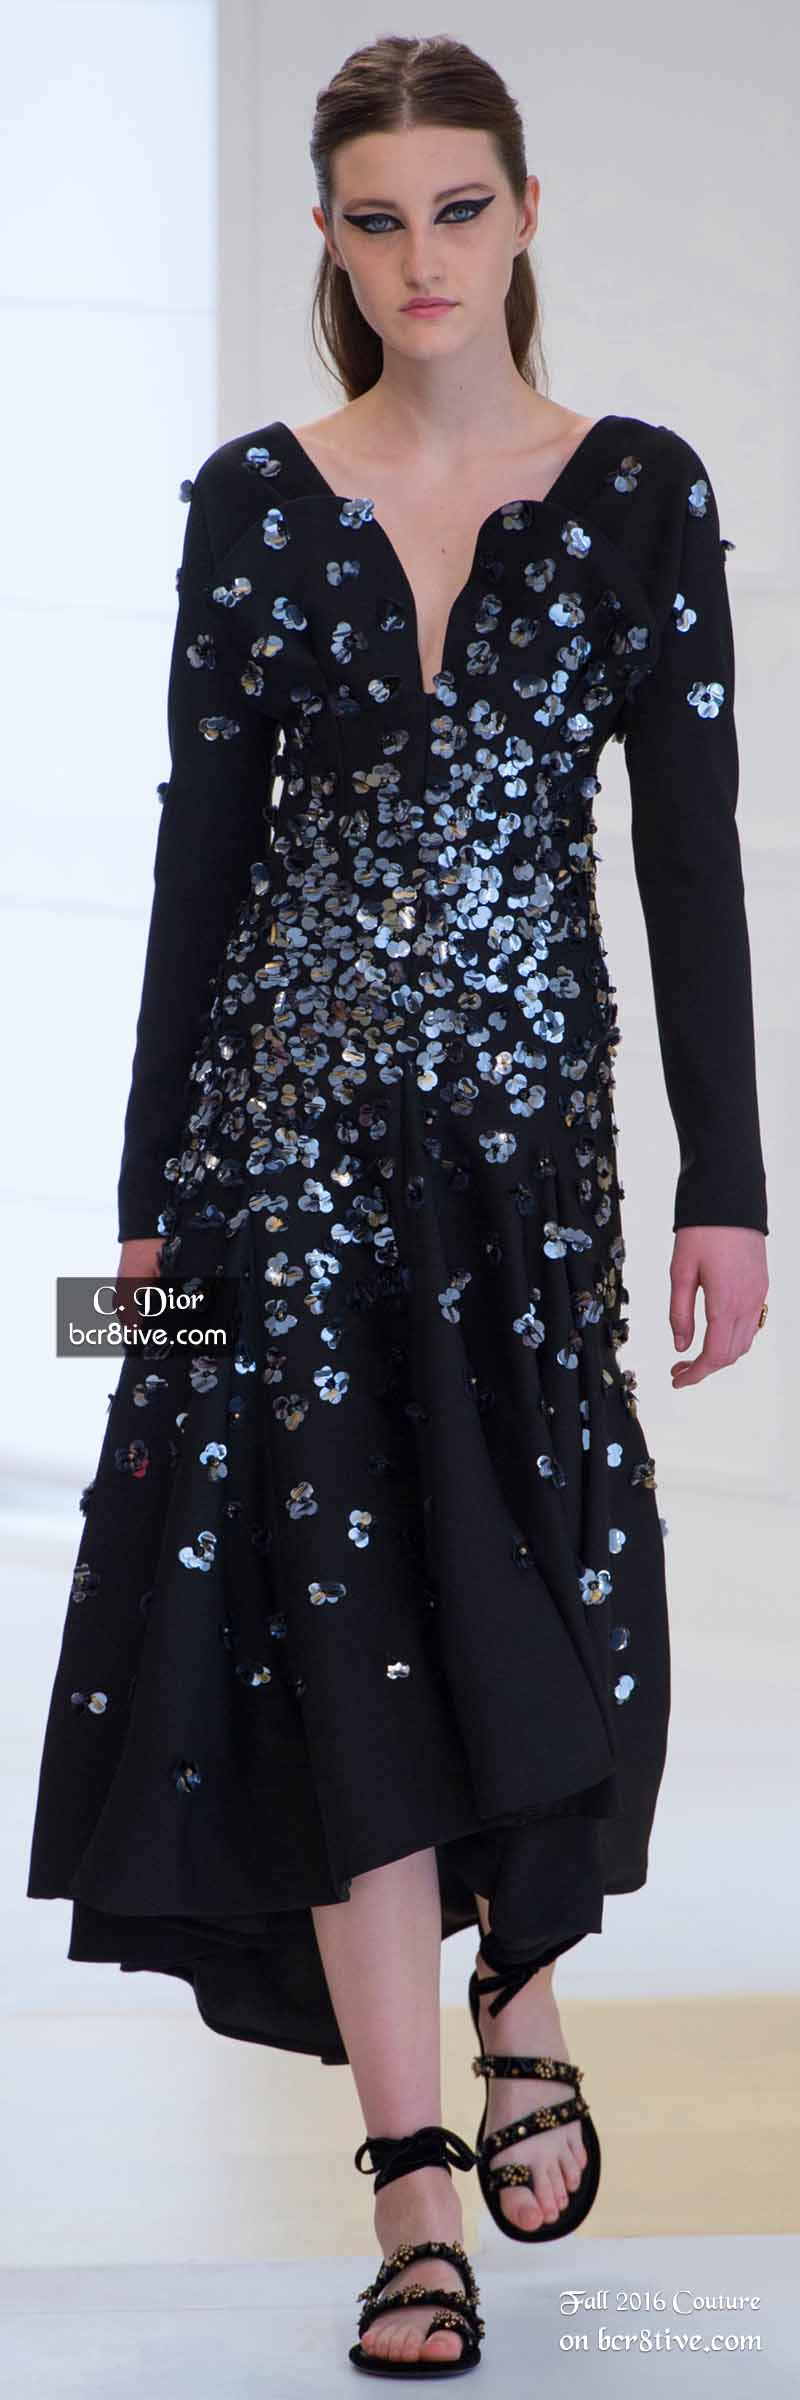 Christian Dior - The Best Fall 2016 Haute Couture Fashion